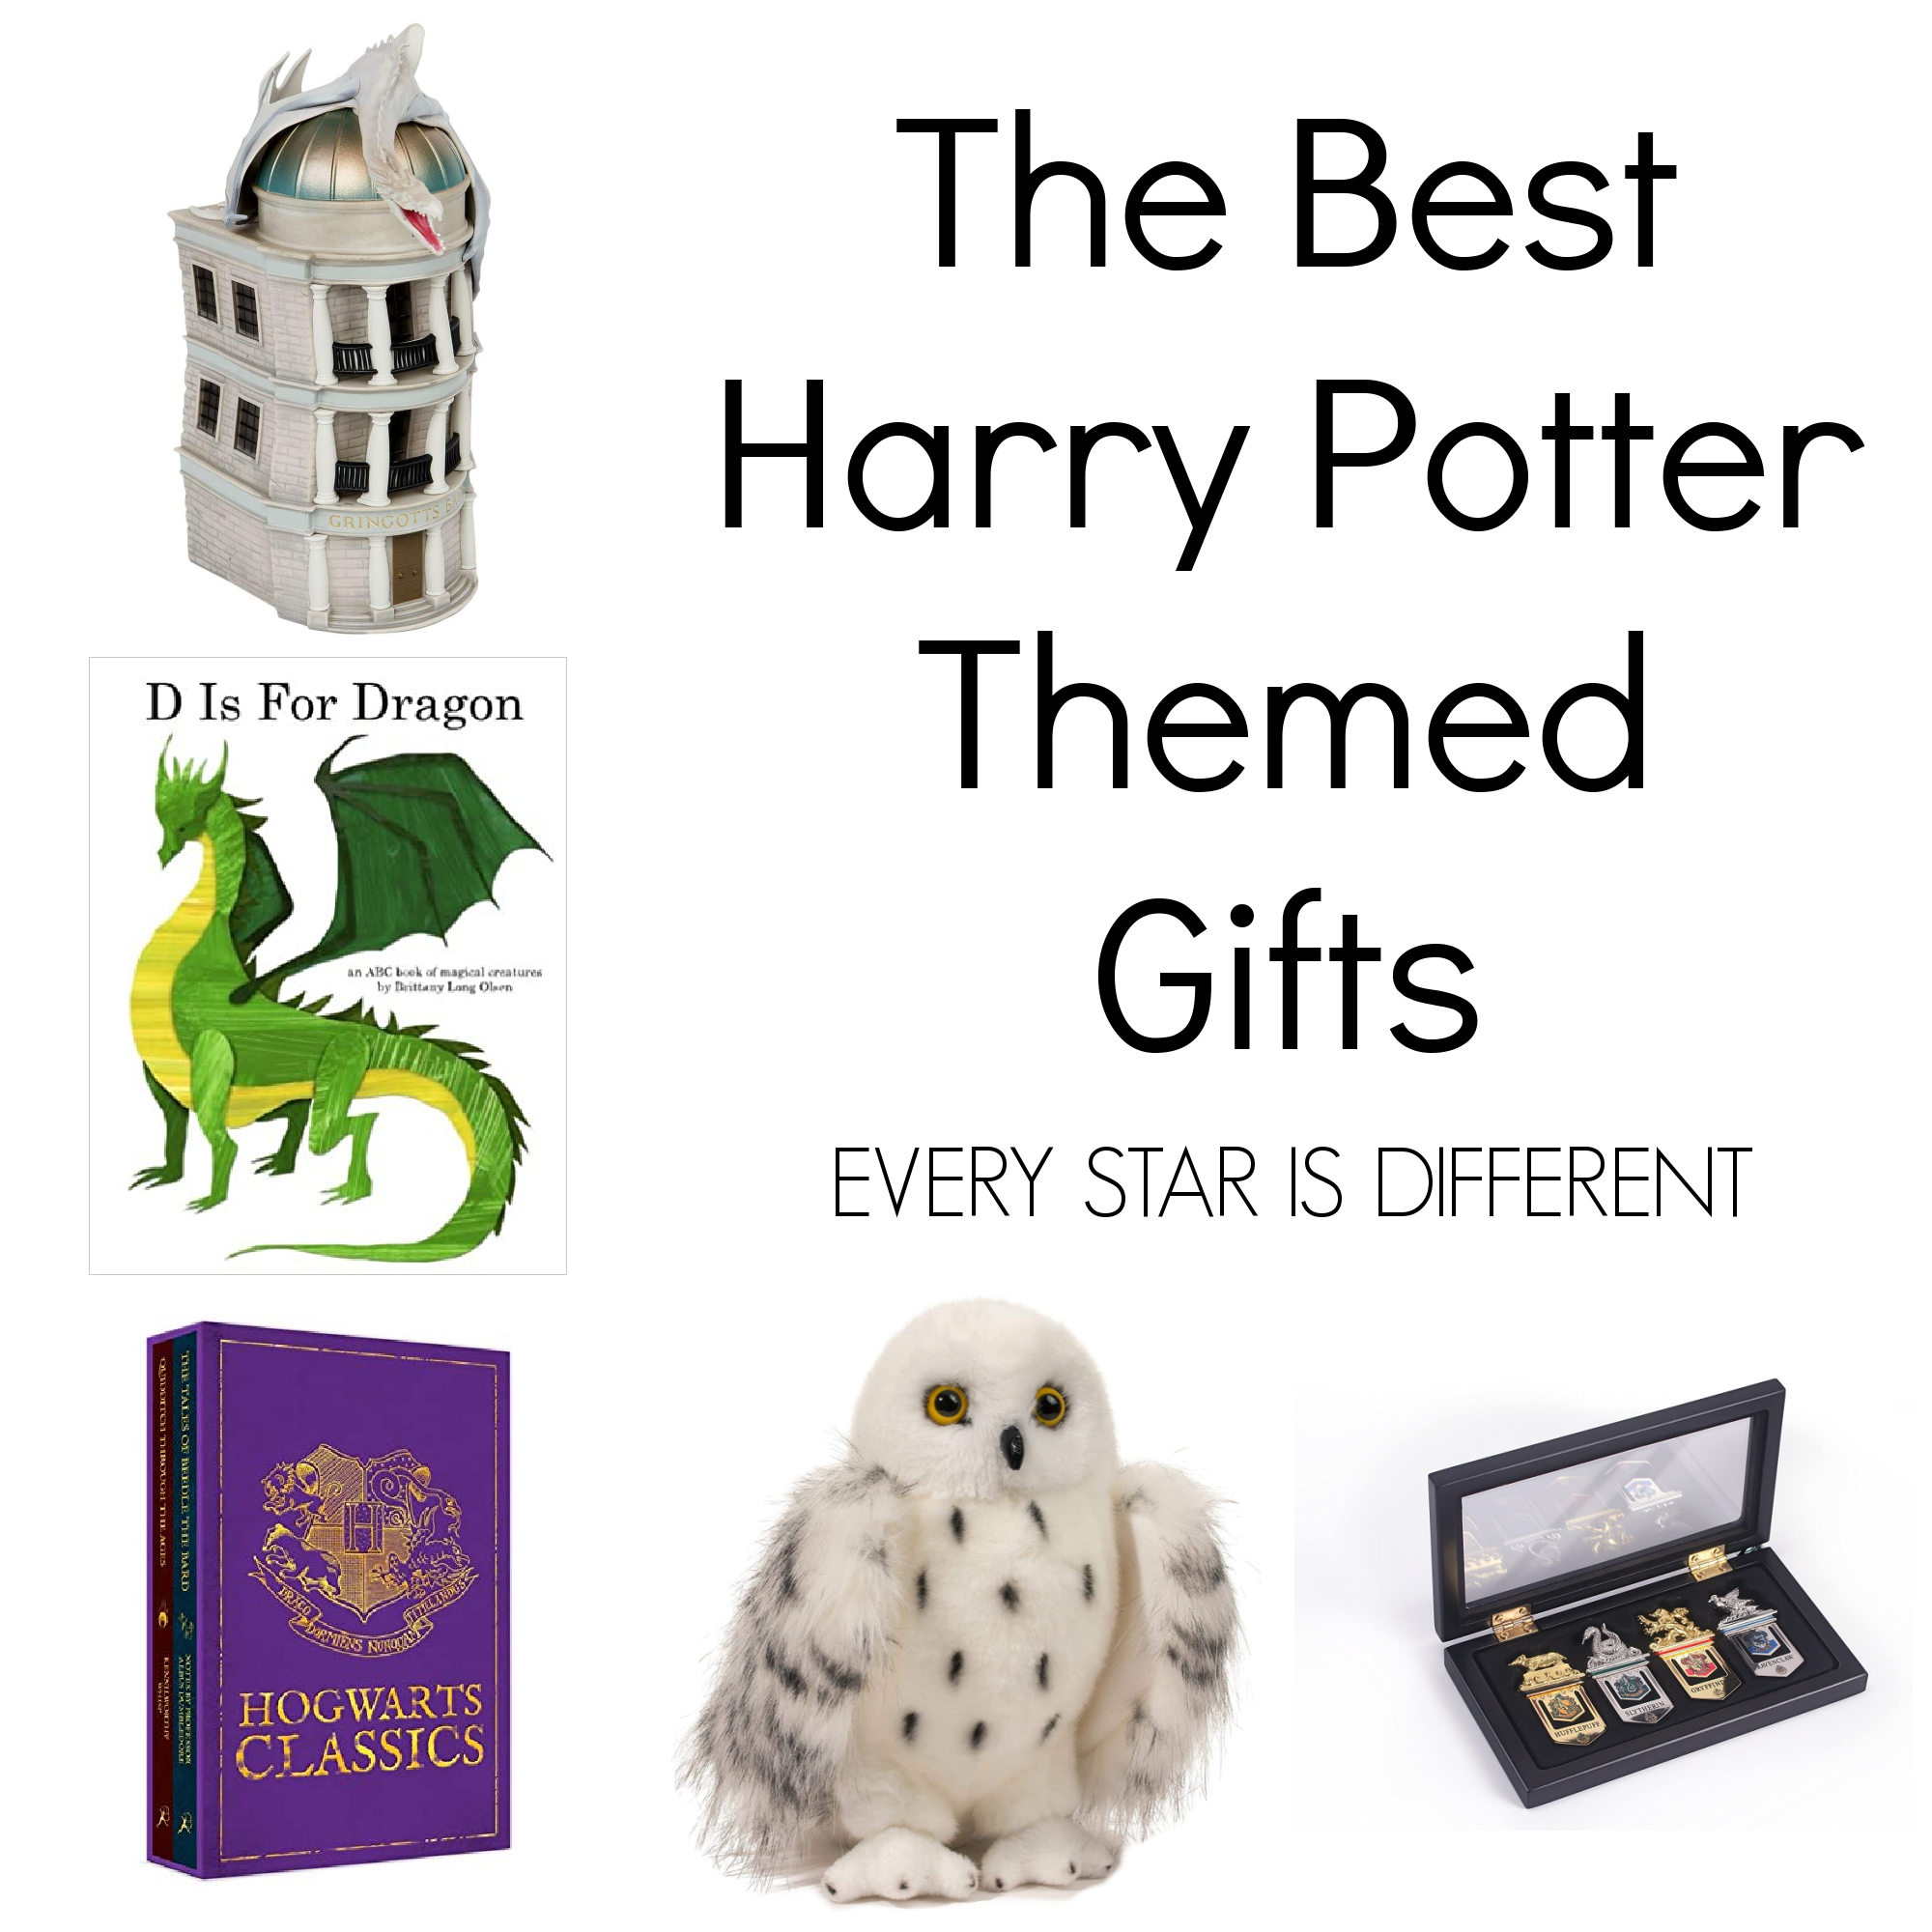 The Best Harry Potter Themed Gifts for Kids